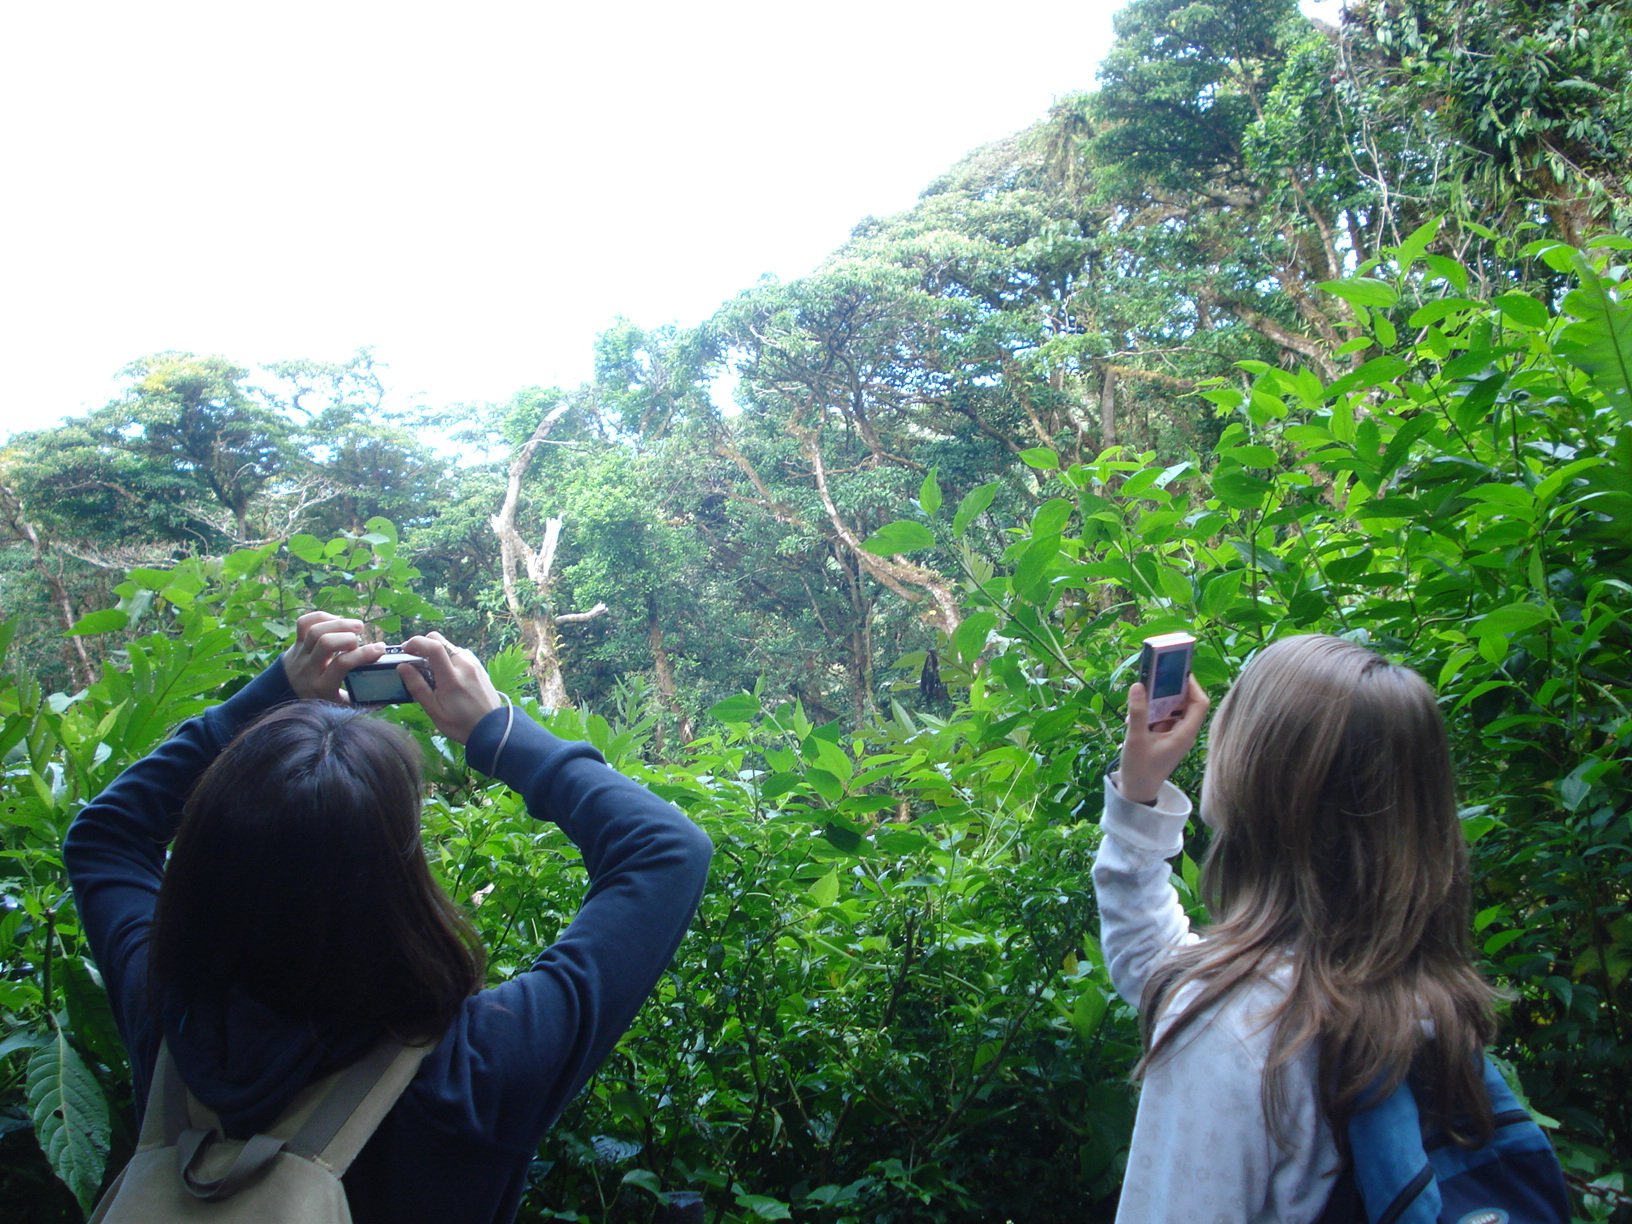 Students taking pictures in the tropical forest